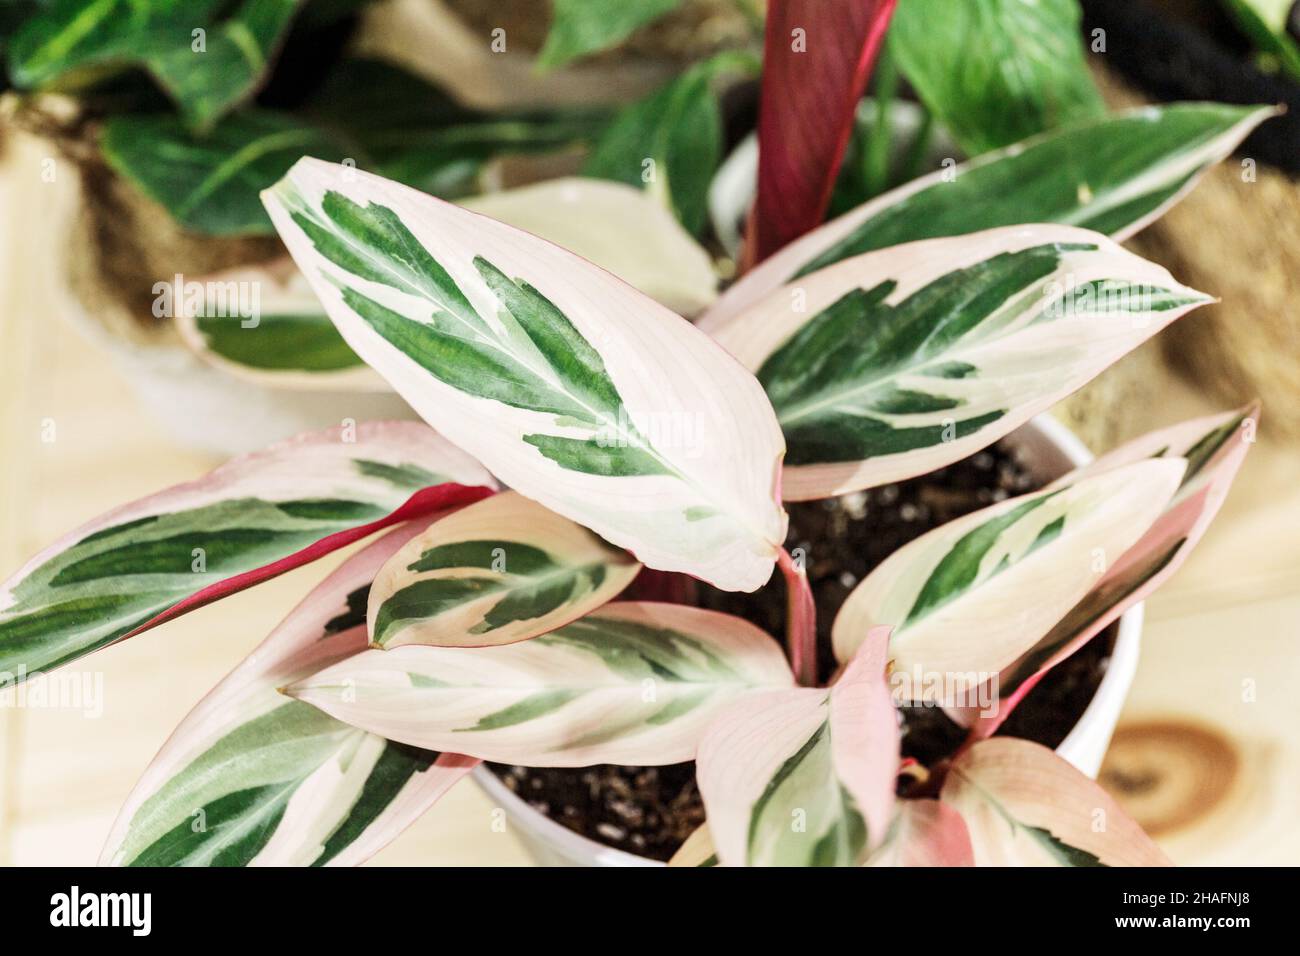 Stromanthe plant with white and pink stripes in a pot on the table. Indoor garden, home gardening. Home interior with flowers, close up Stock Photo